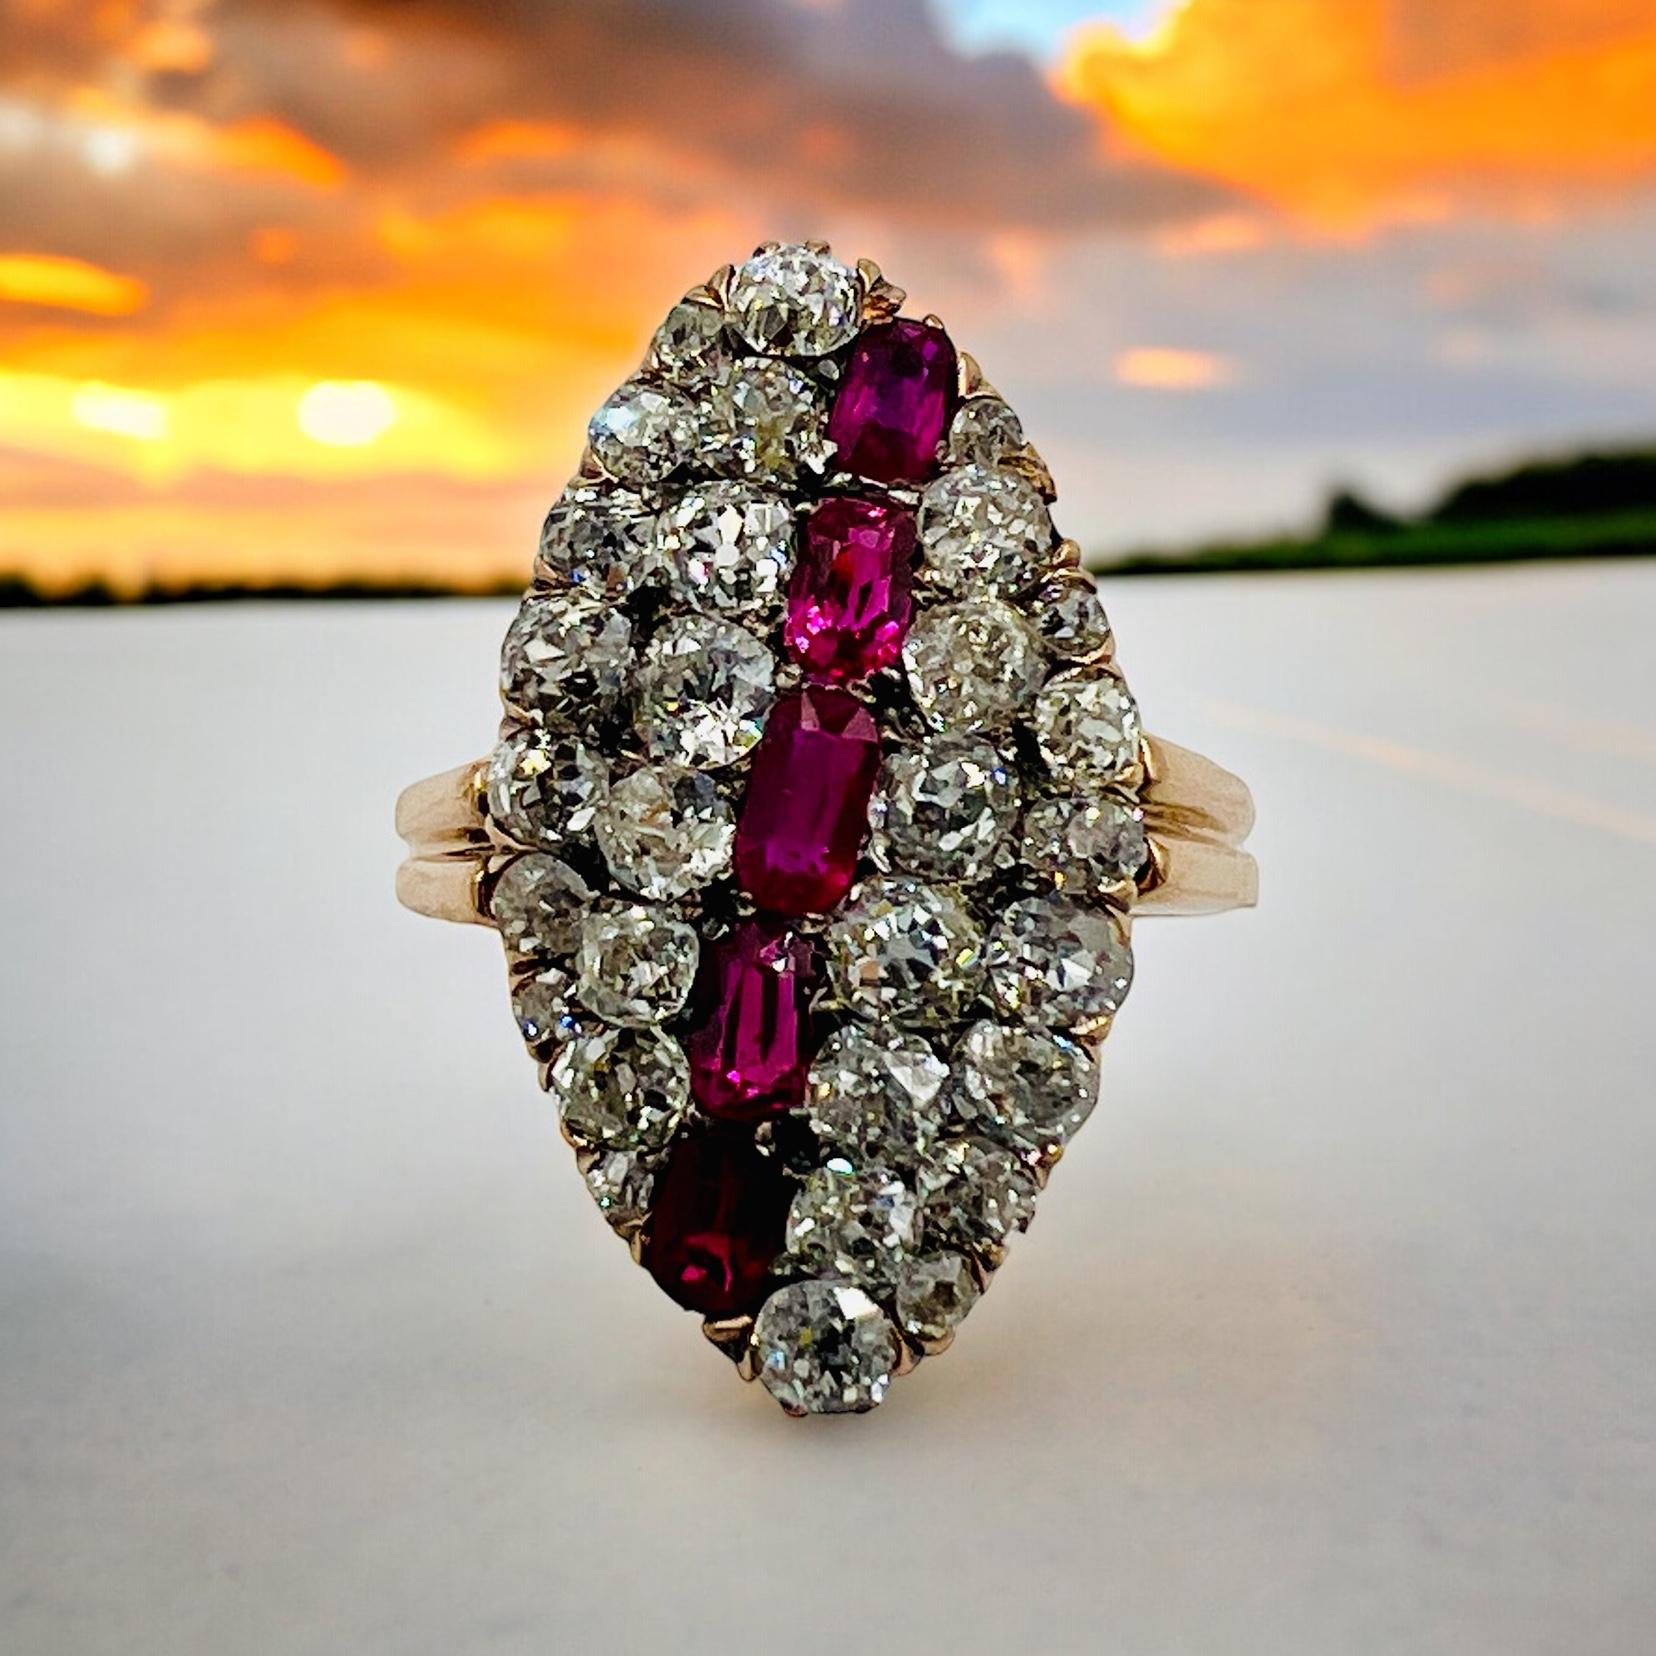 Victorian ruby diamond gold ring, circa 1890s.

This navette shaped Victorian Ruby Diamond Gold Ring is a timeless piece of jewelry that encapsulates the elegance and opulence of the Victorian era. Crafted with intricate detail and exquisite